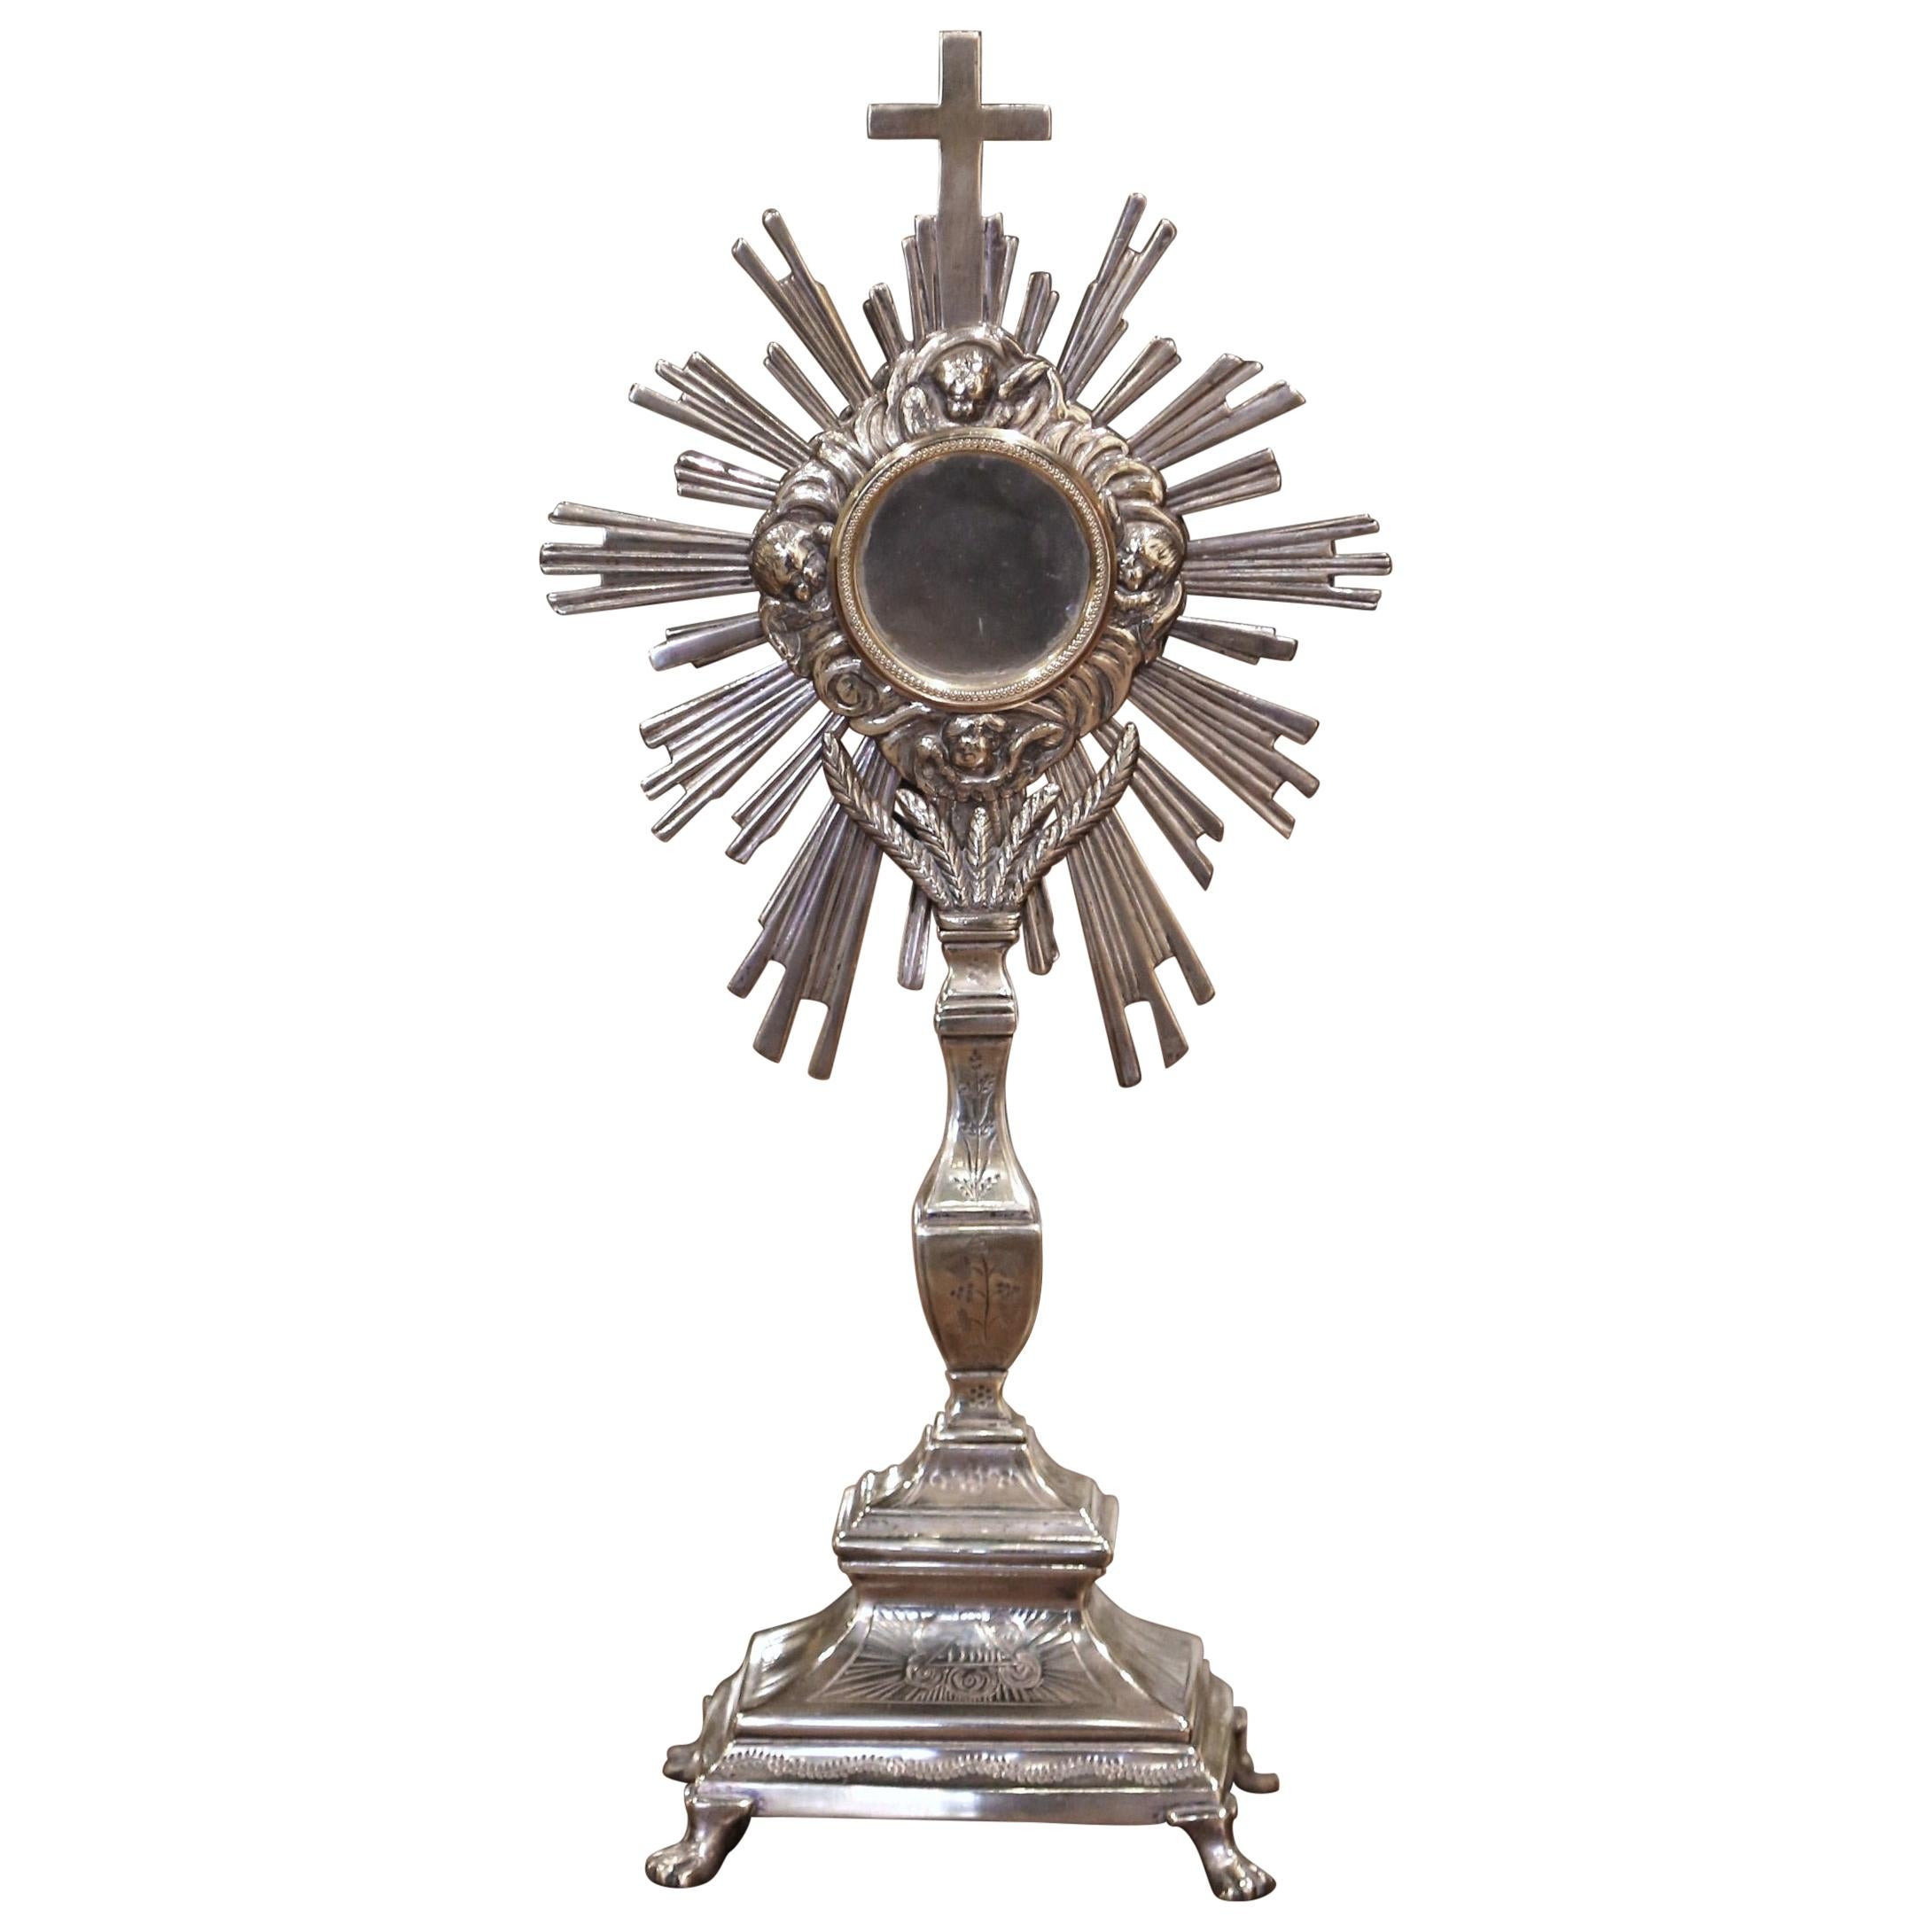 19th Century French Bronze Silvered Catholic Monstrance with Cross & Wheat Decor